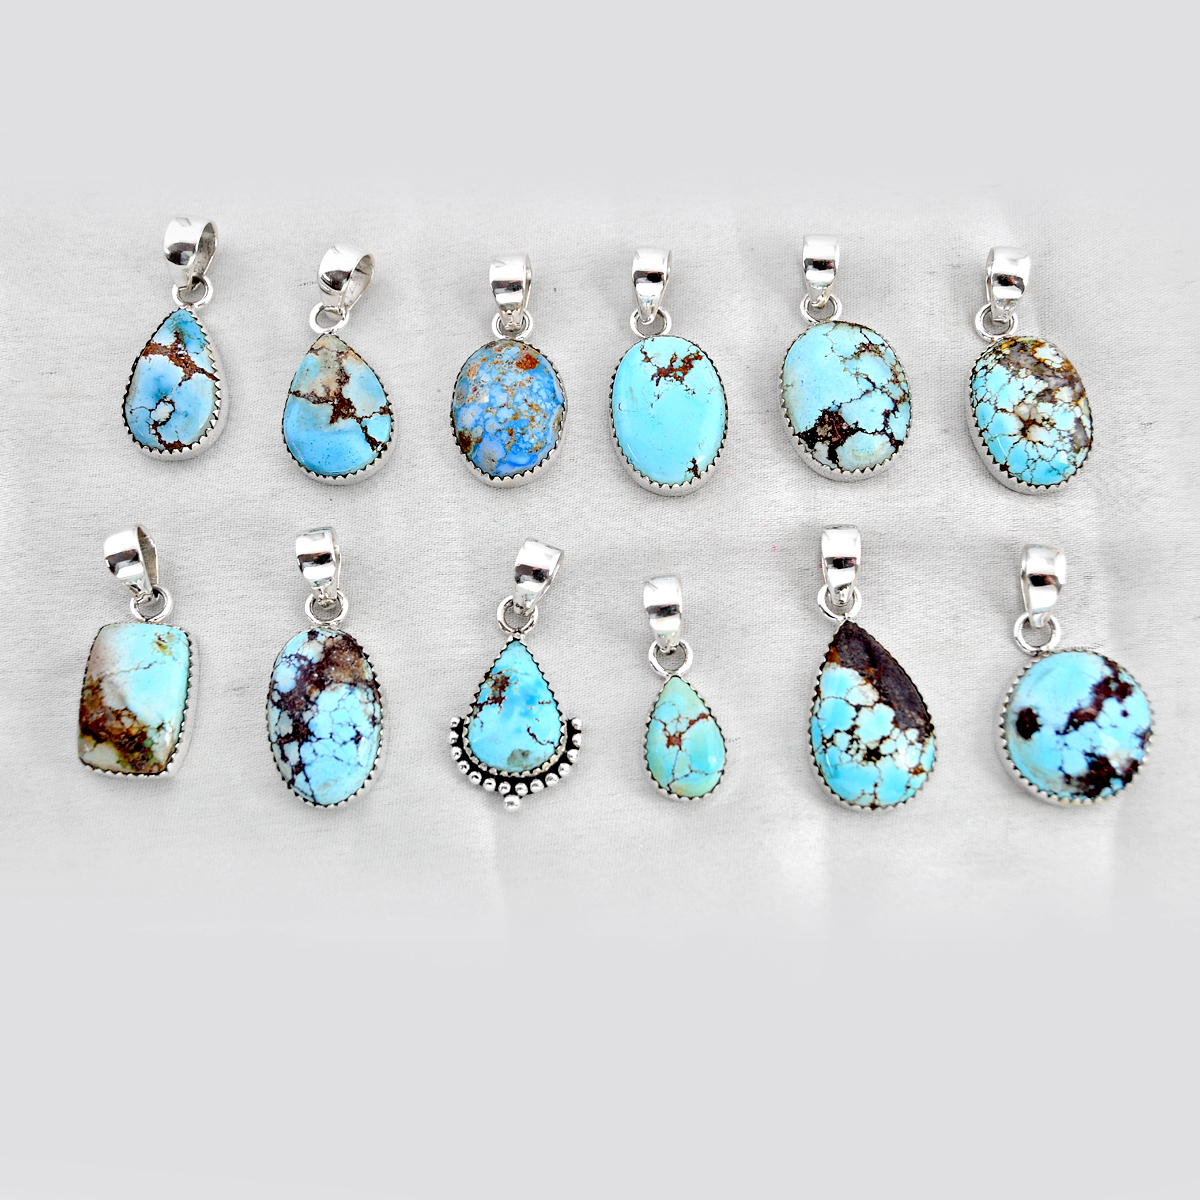 Hand-Carved-Wholesale-Lot-Of-12-Natural-Golden-Hills-Turquoise-Pendant-W3920